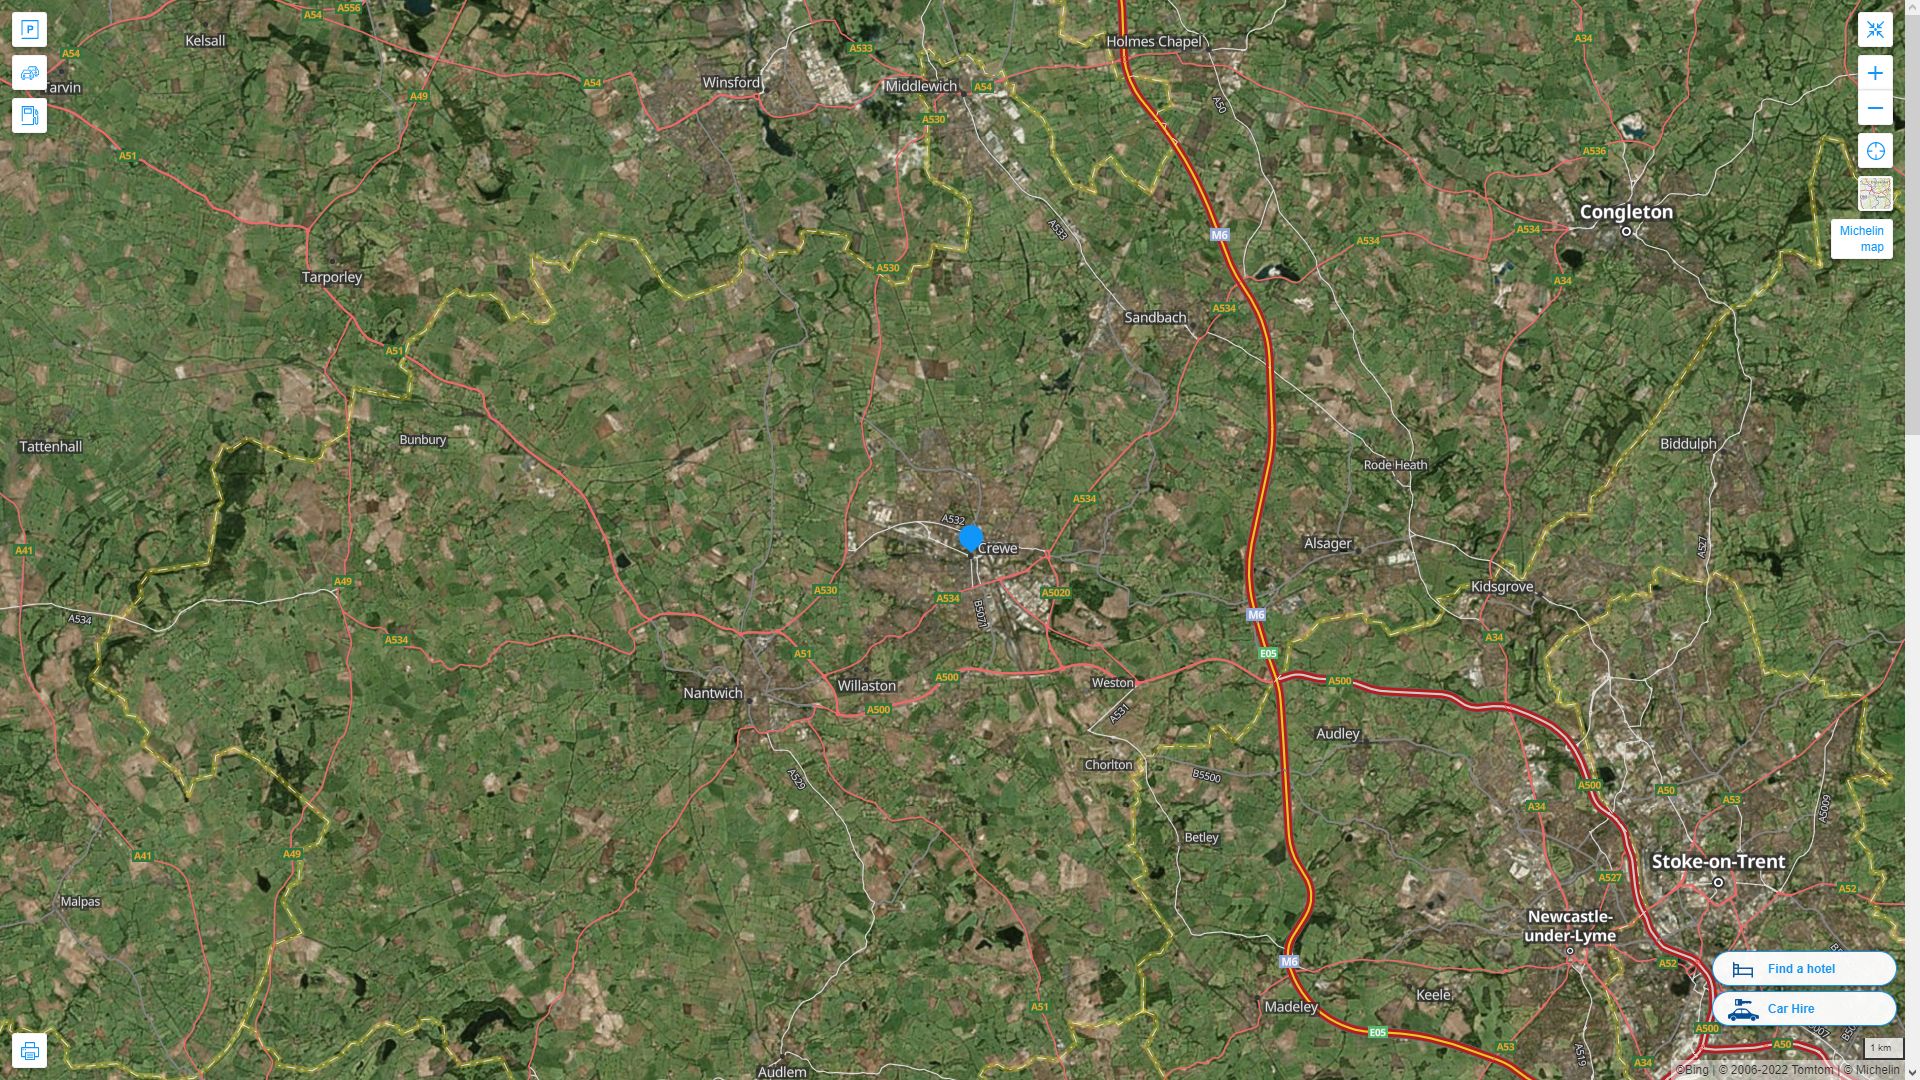 Crewe Highway and Road Map with Satellite View